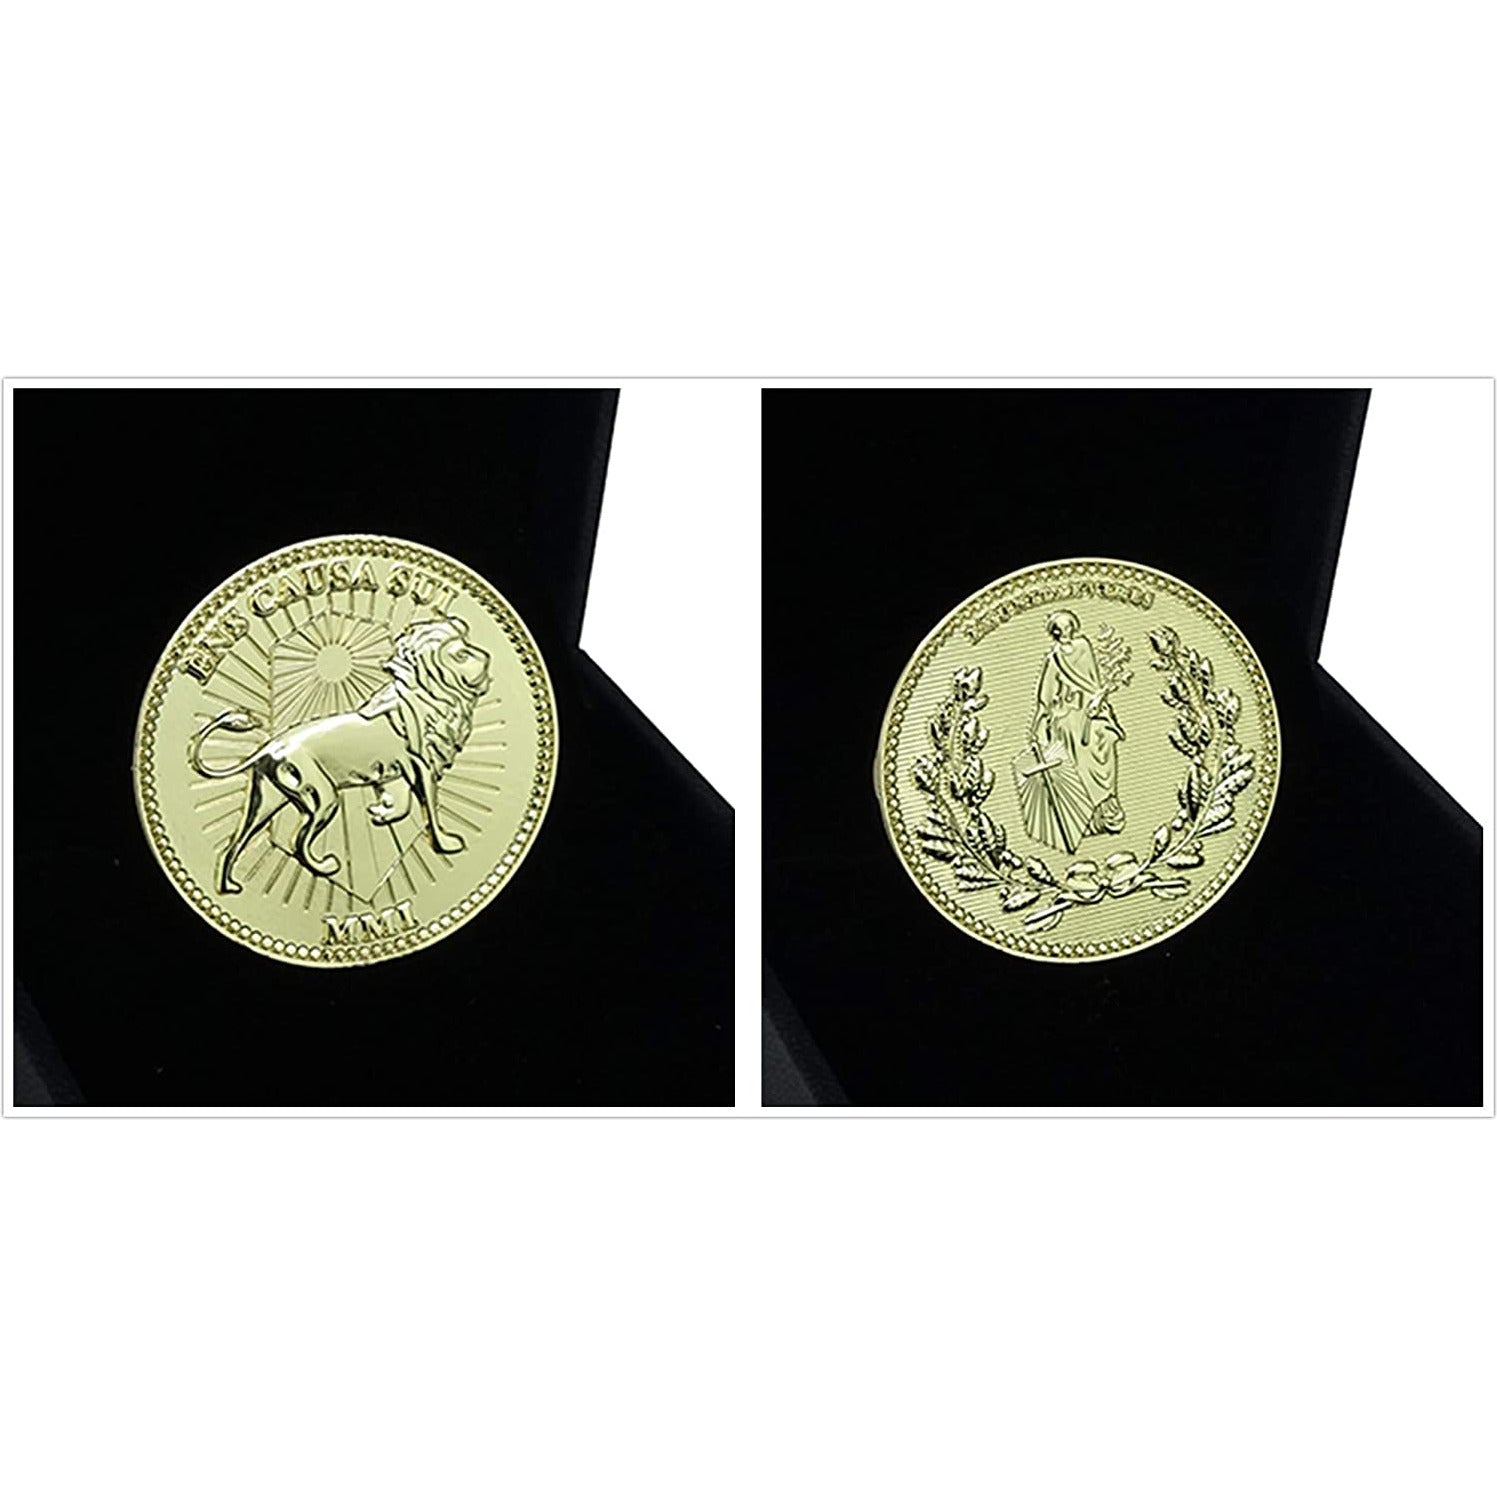 John Wick Coin Gold Zinc Alloy Coin Collect for Movie Props Cosplay Accessories (2pcs)